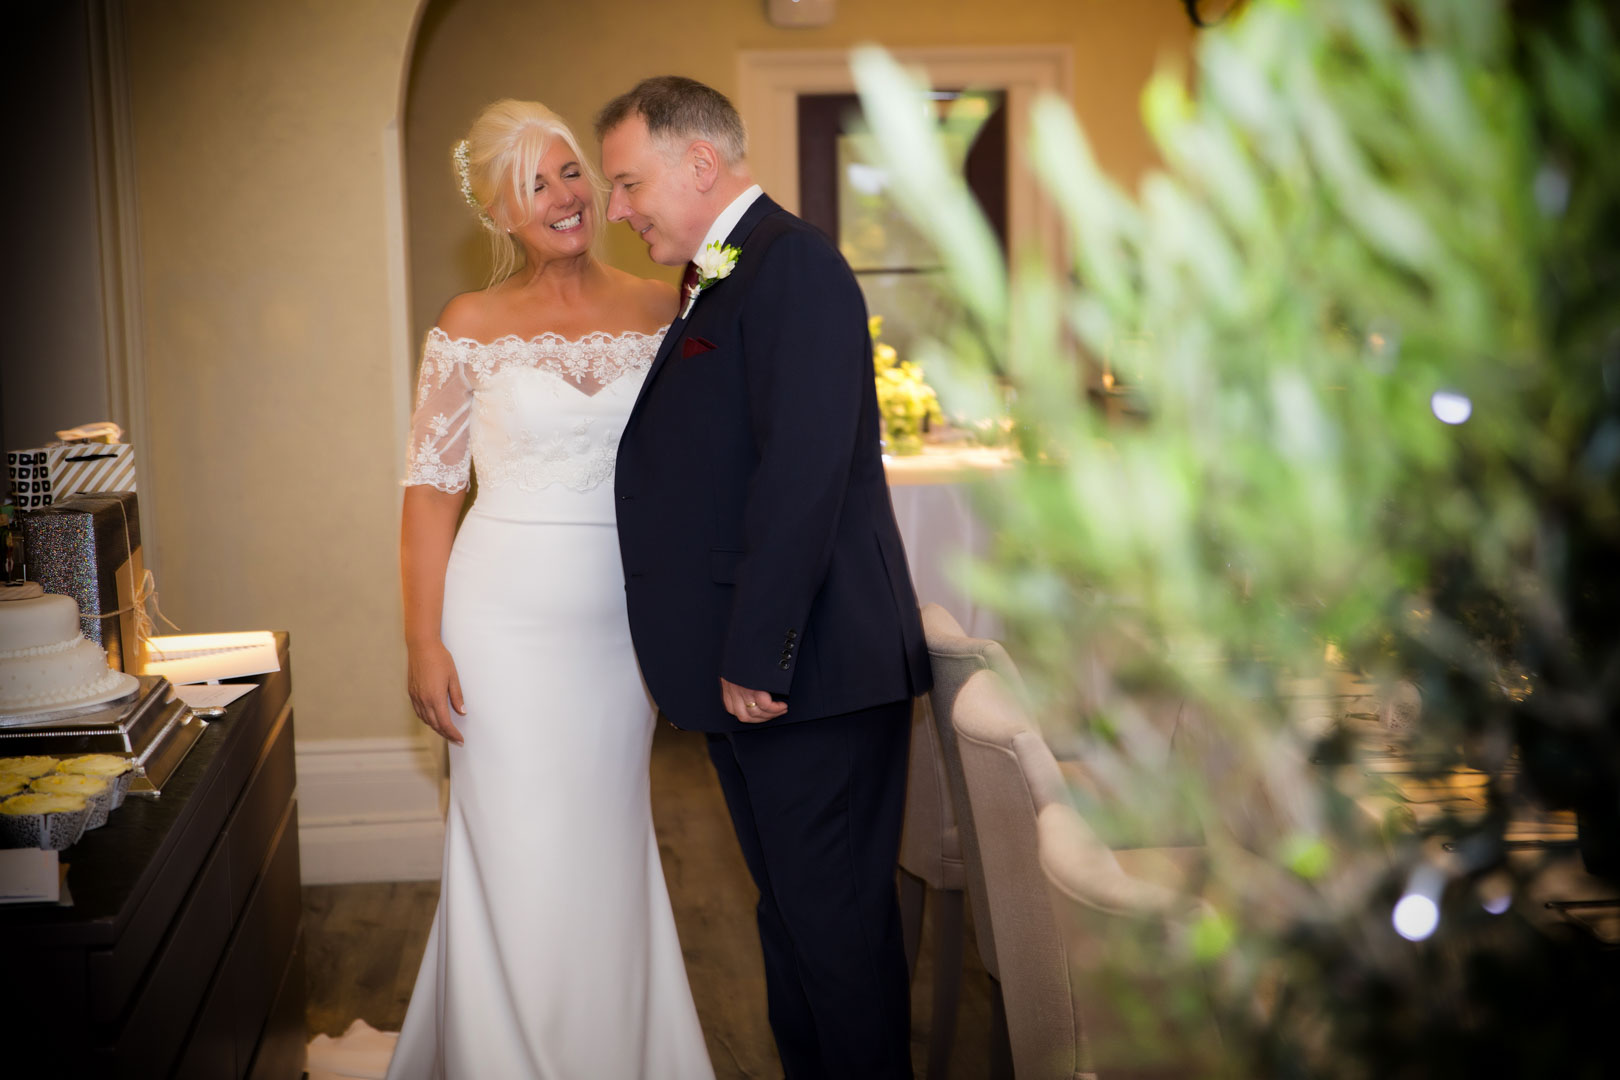 Paul and Louise's wedding photography in Lytham St Annes (68 of 70)